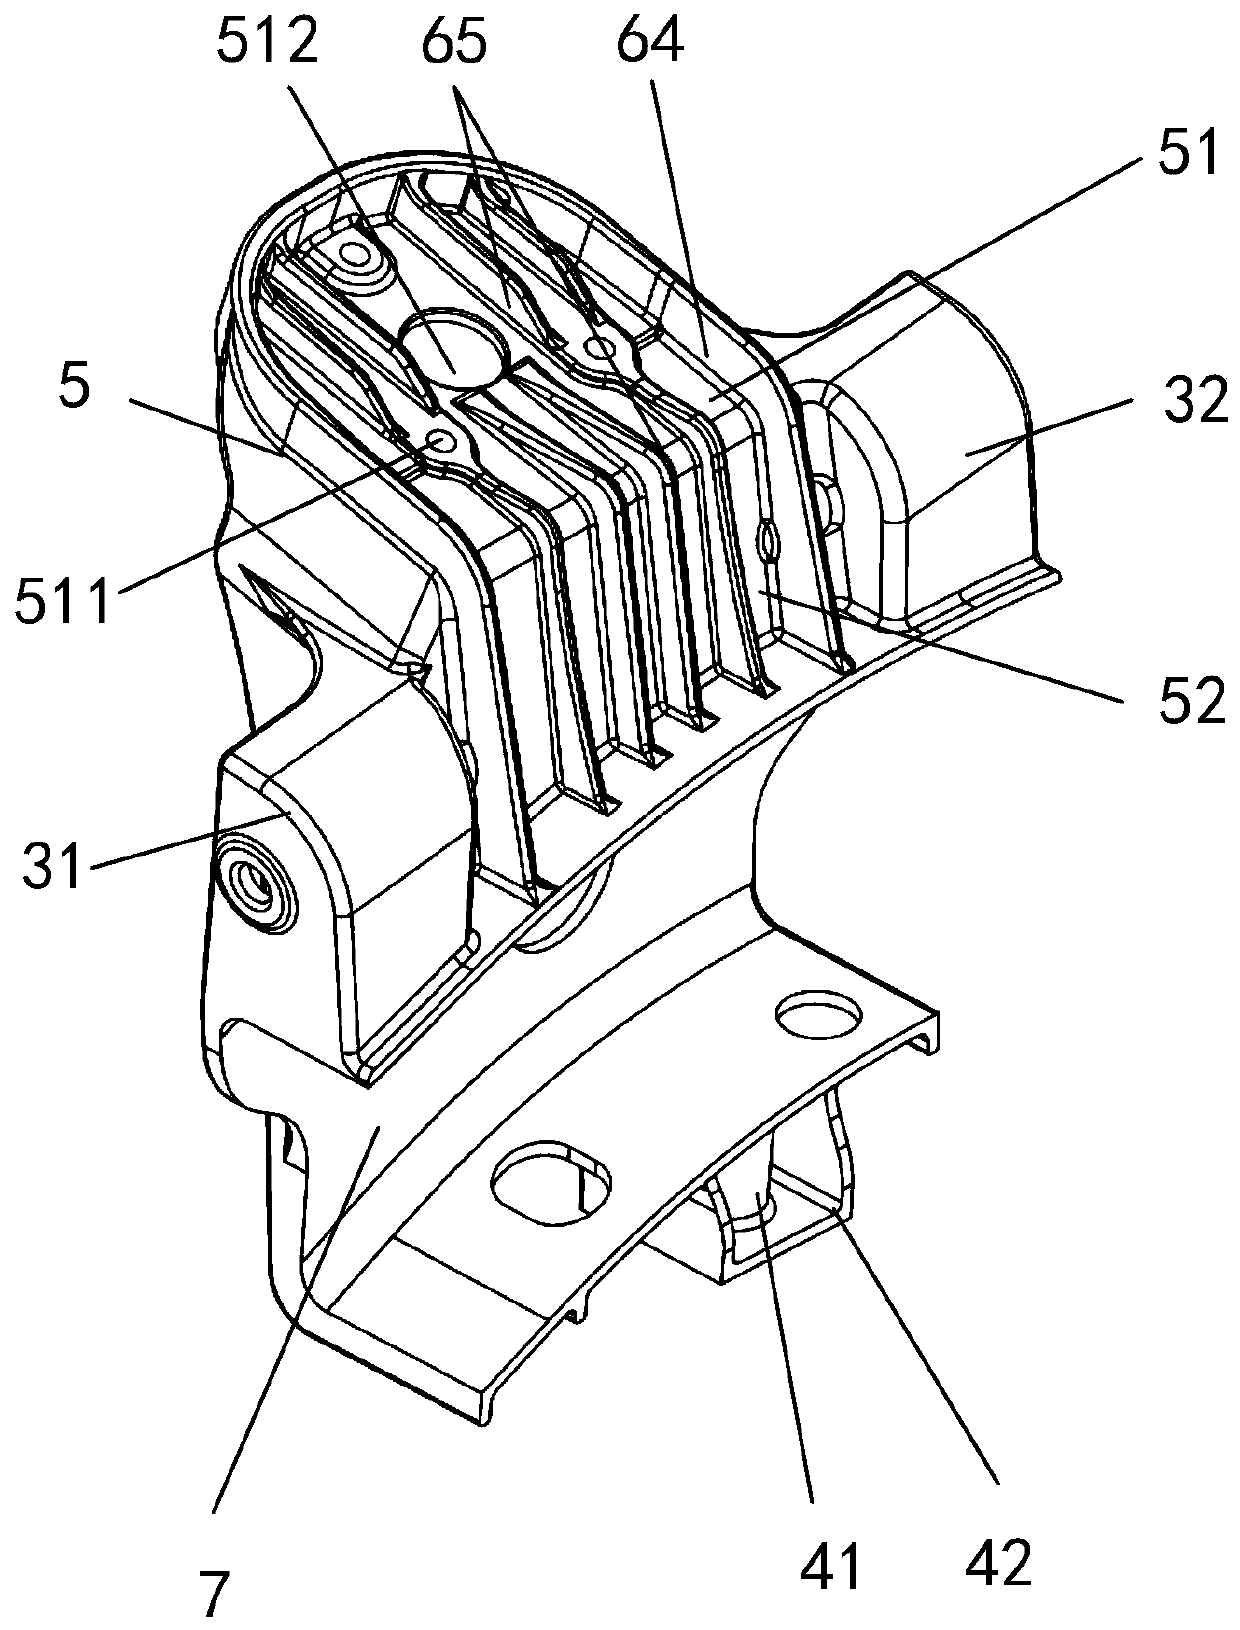 Dual fork arm type front suspension mounting assembly